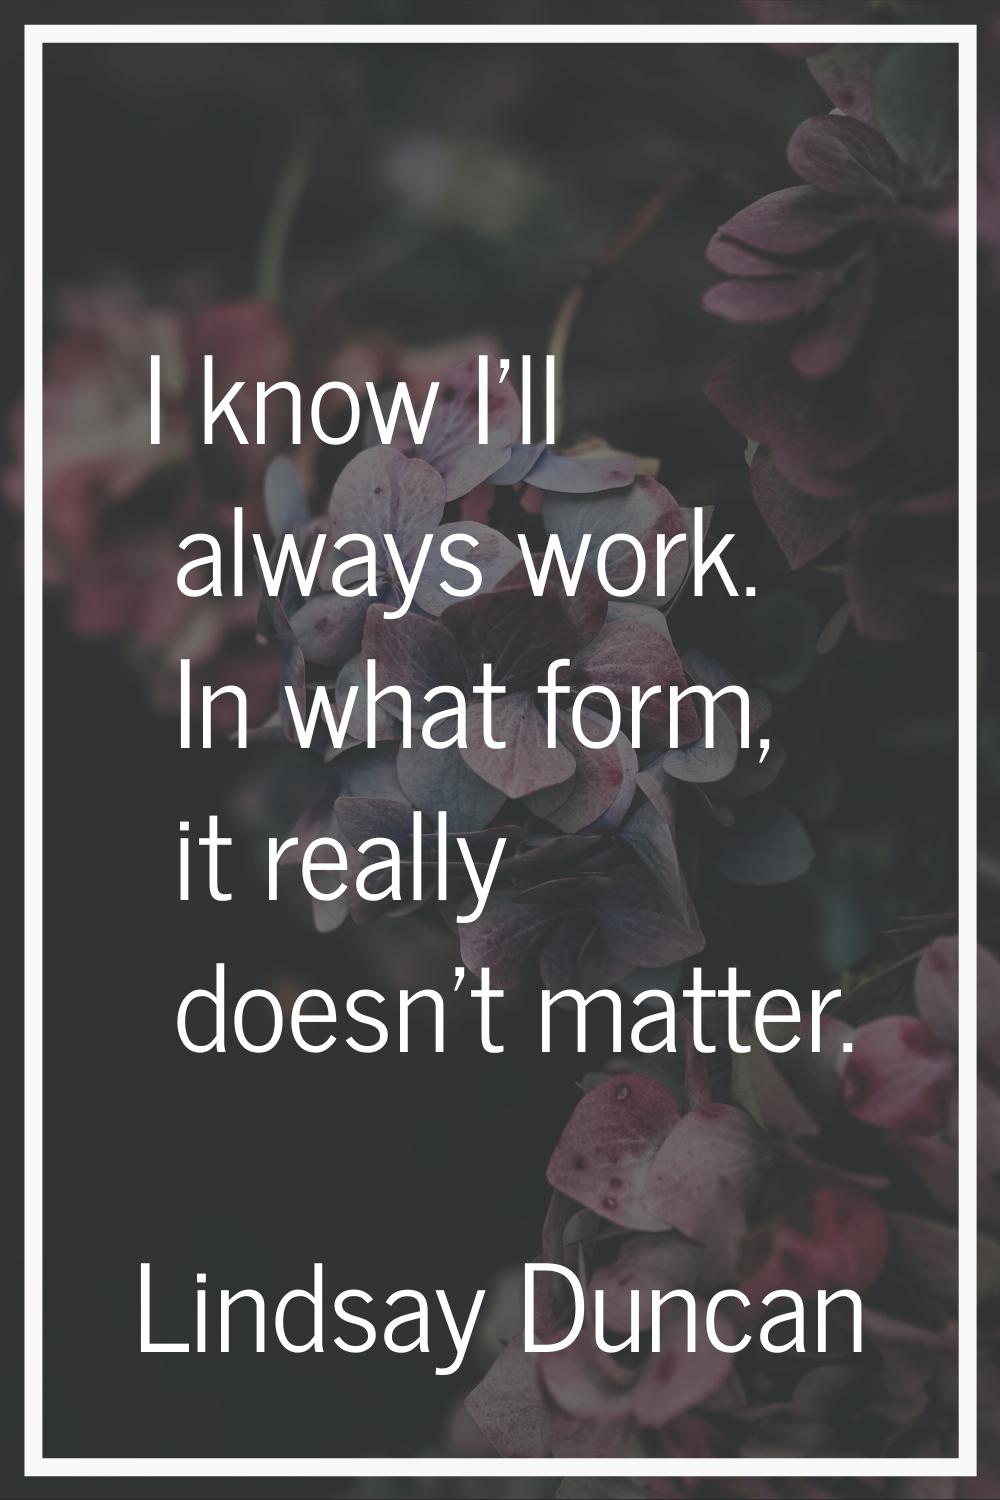 I know I'll always work. In what form, it really doesn't matter.